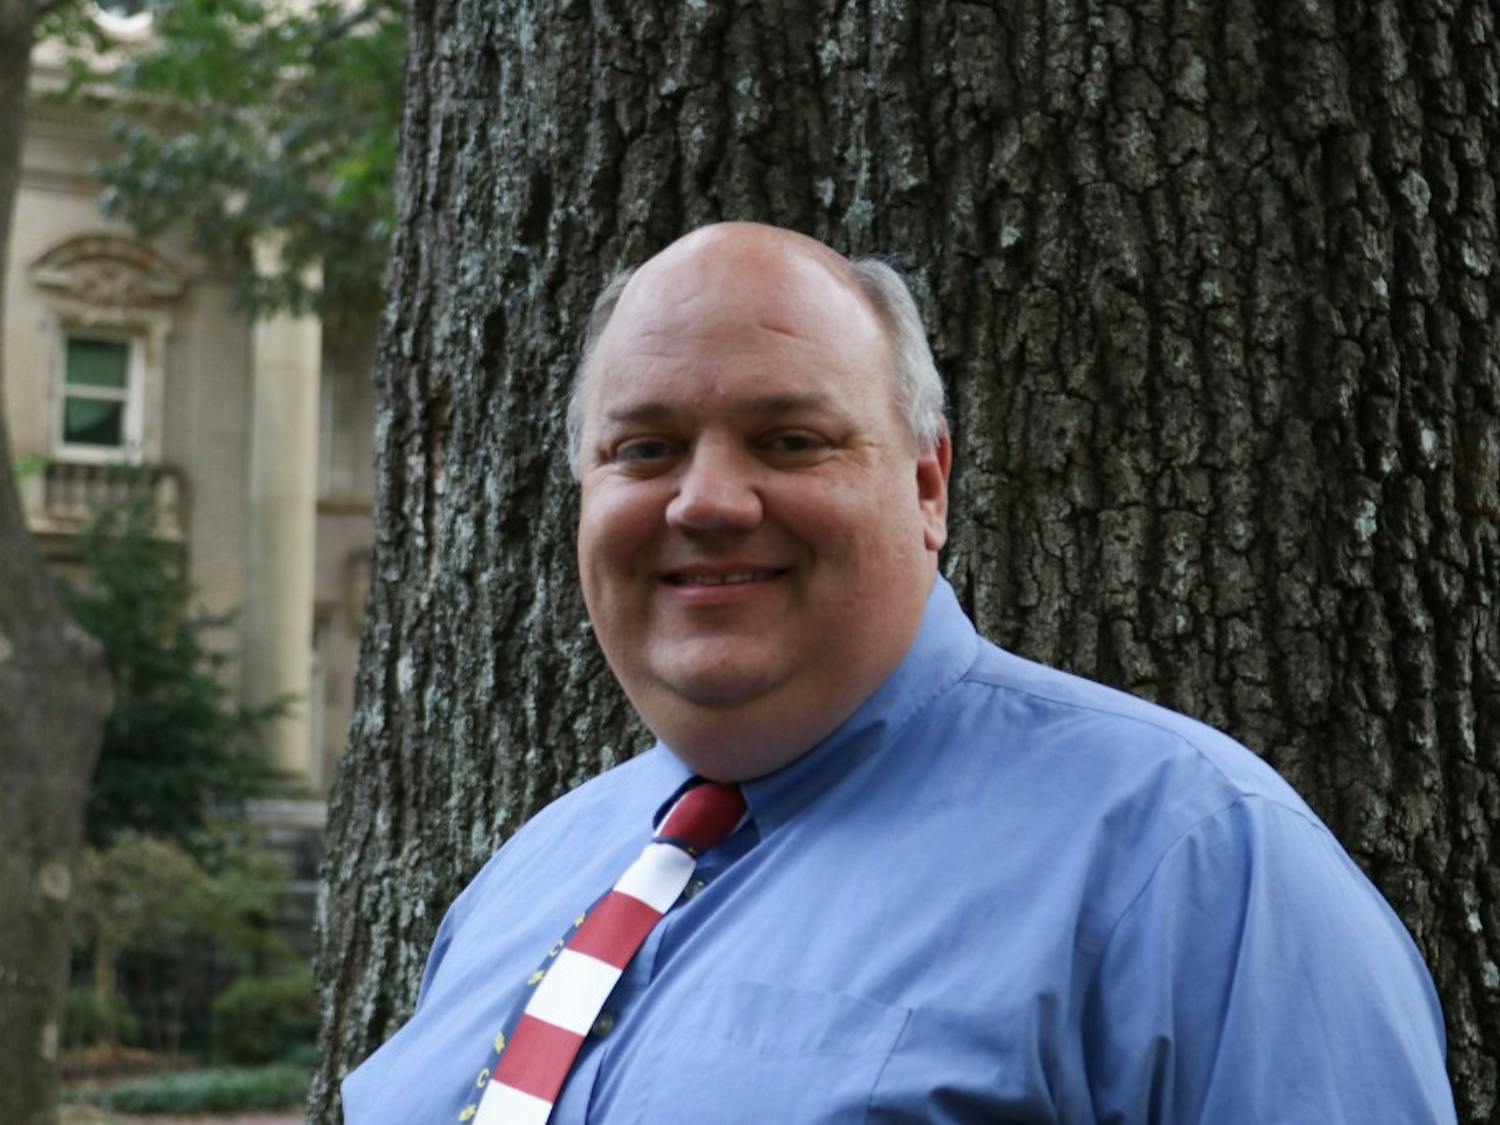 James Barrett is the current longest-running board member for the Chapel Hill-Carrboro City School Board. He is not running for re-election and pursuing becoming the NC State Superintendent in the November 2020 election.
